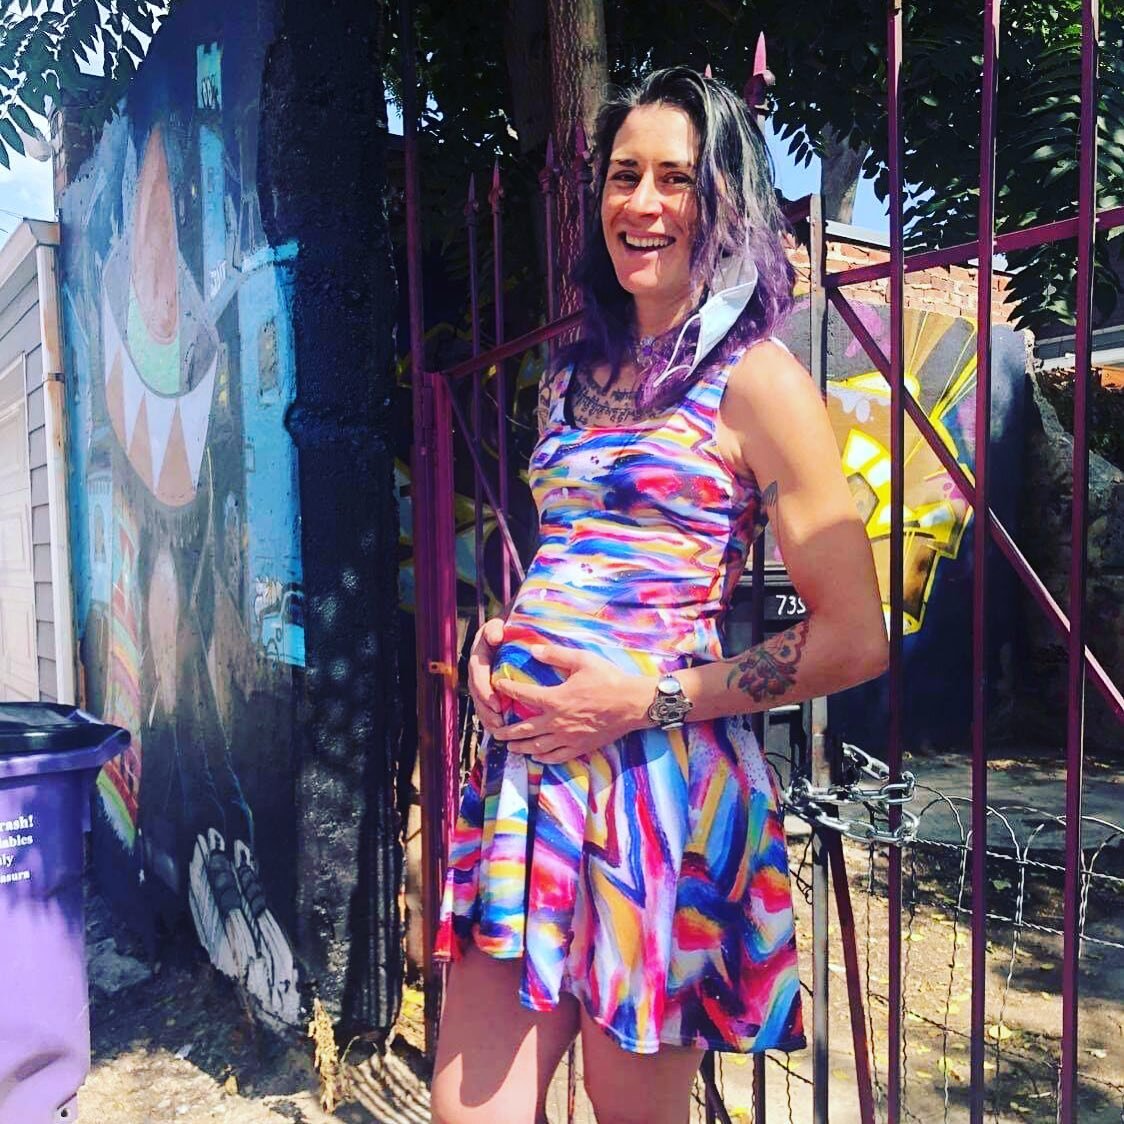 Home stretch in the 3rd Trimester enjoying the last day of summer outside the Denver Art Society where I have my art studio. Due Date is 11/27 and we are expecting a baby boy, his name will be Lazuli or Laz for short. Everyday I do a gratitude 🙏🏽 p